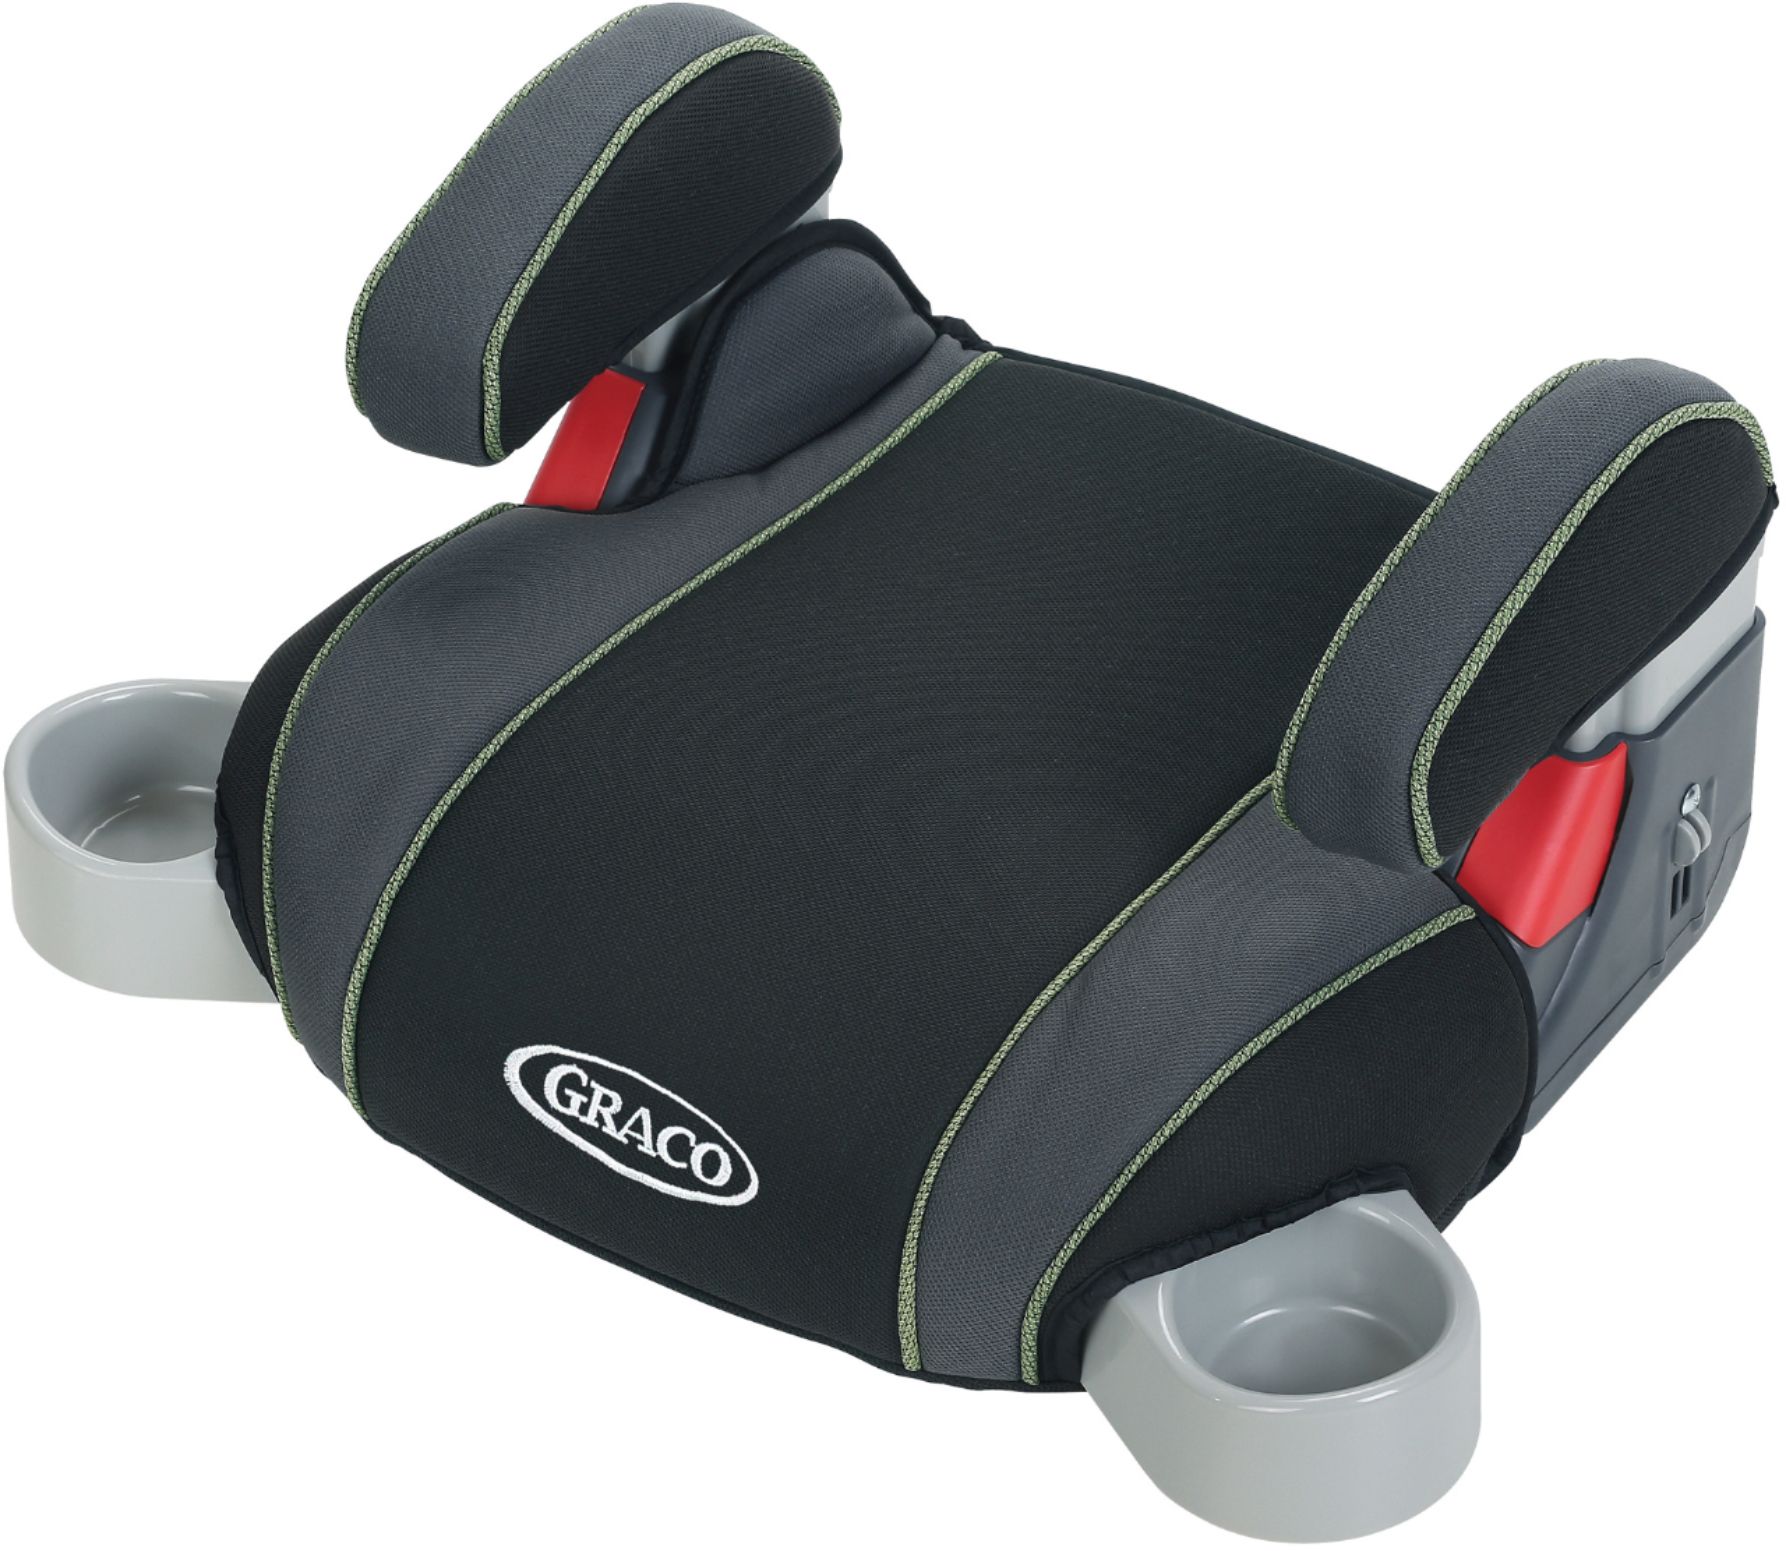 Angle View: Graco TurboBooster Backless Booster Car Seat, Emory